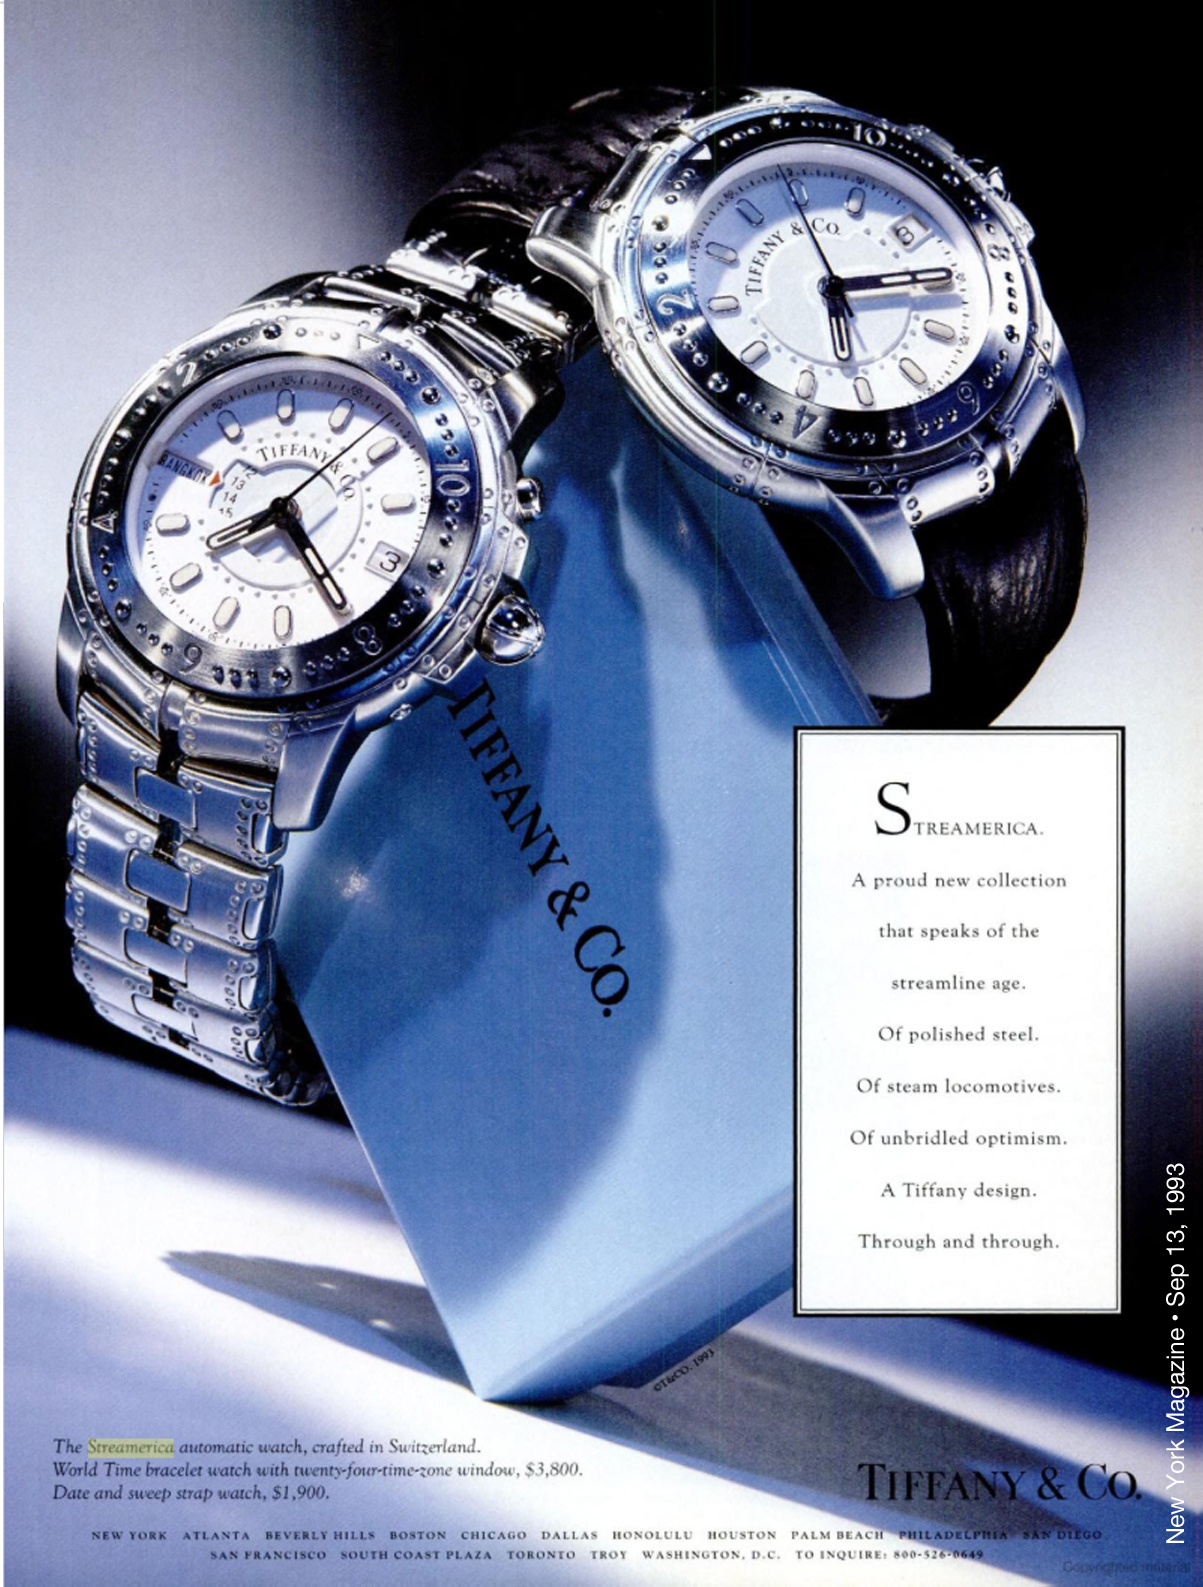 1993 advertisement from Tiffany & Co. Stainless steel World Time Automatic Watch and Automatic Chronometer with leather band. Tiffany & Co. Streamerica Stainless Steel Collection Advertisements Watch Ads New York Magazine September 13,1993 Prices Price Worth